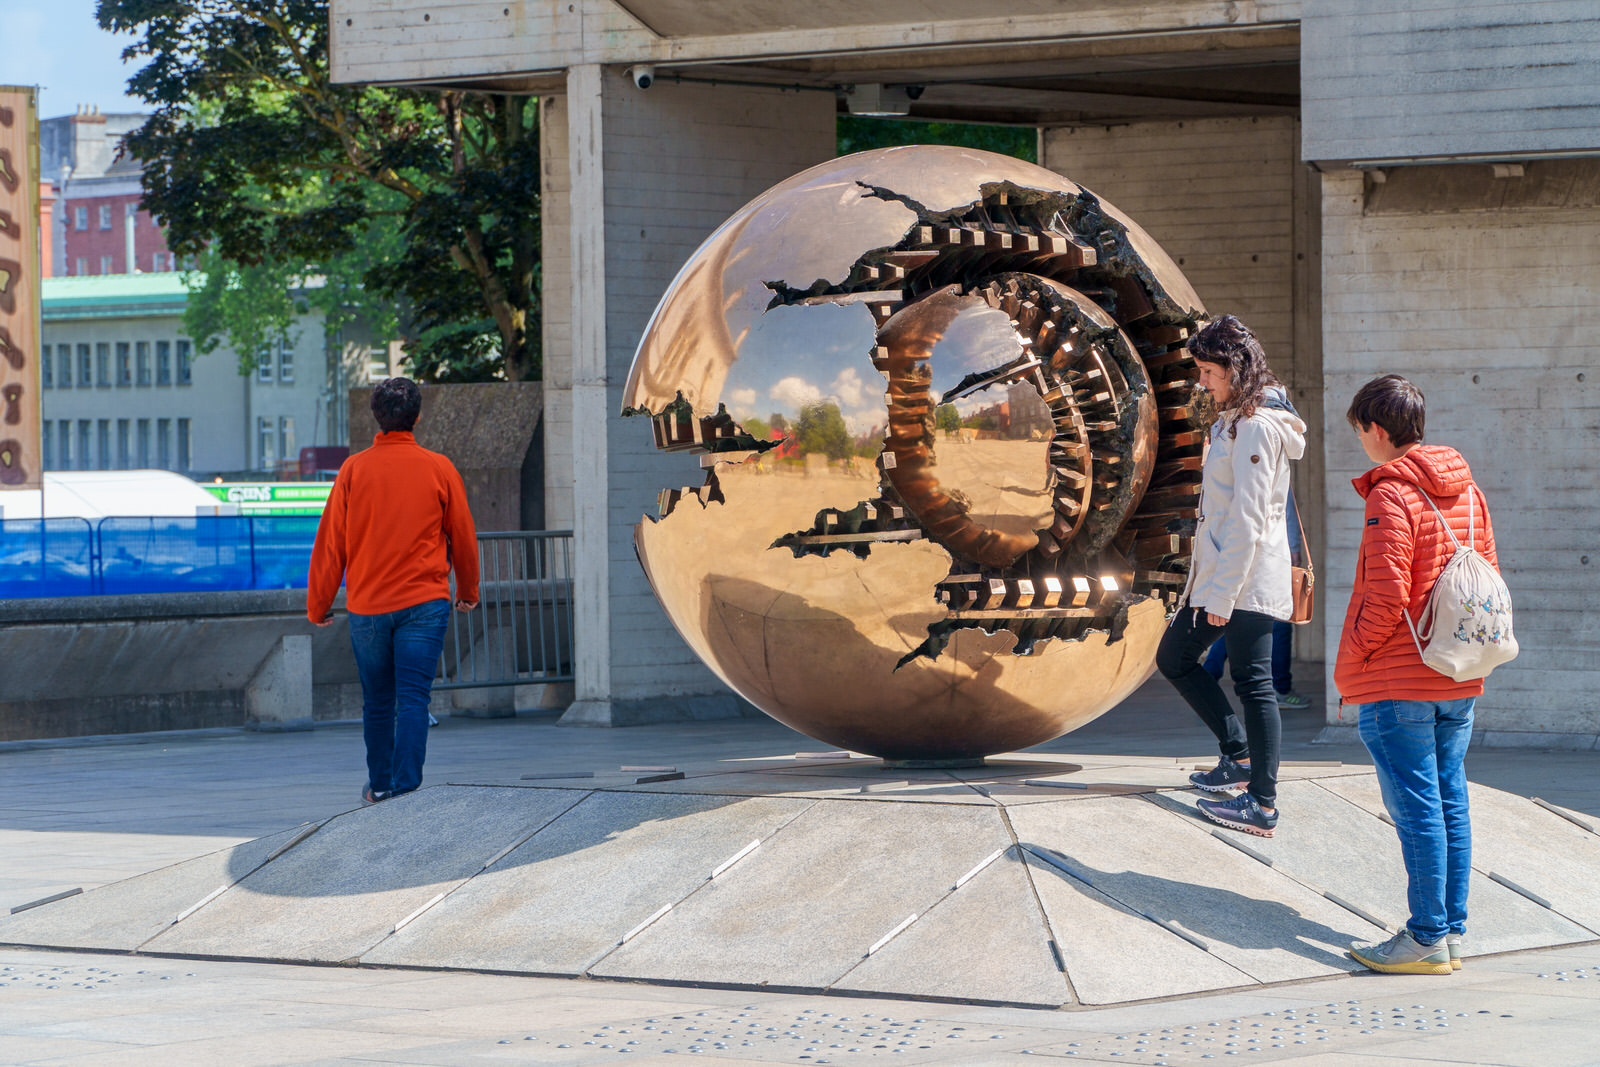 THE BERKELEY LIBRARY FORECOURT AND THE SPHERE WITHIN THE SPHERE